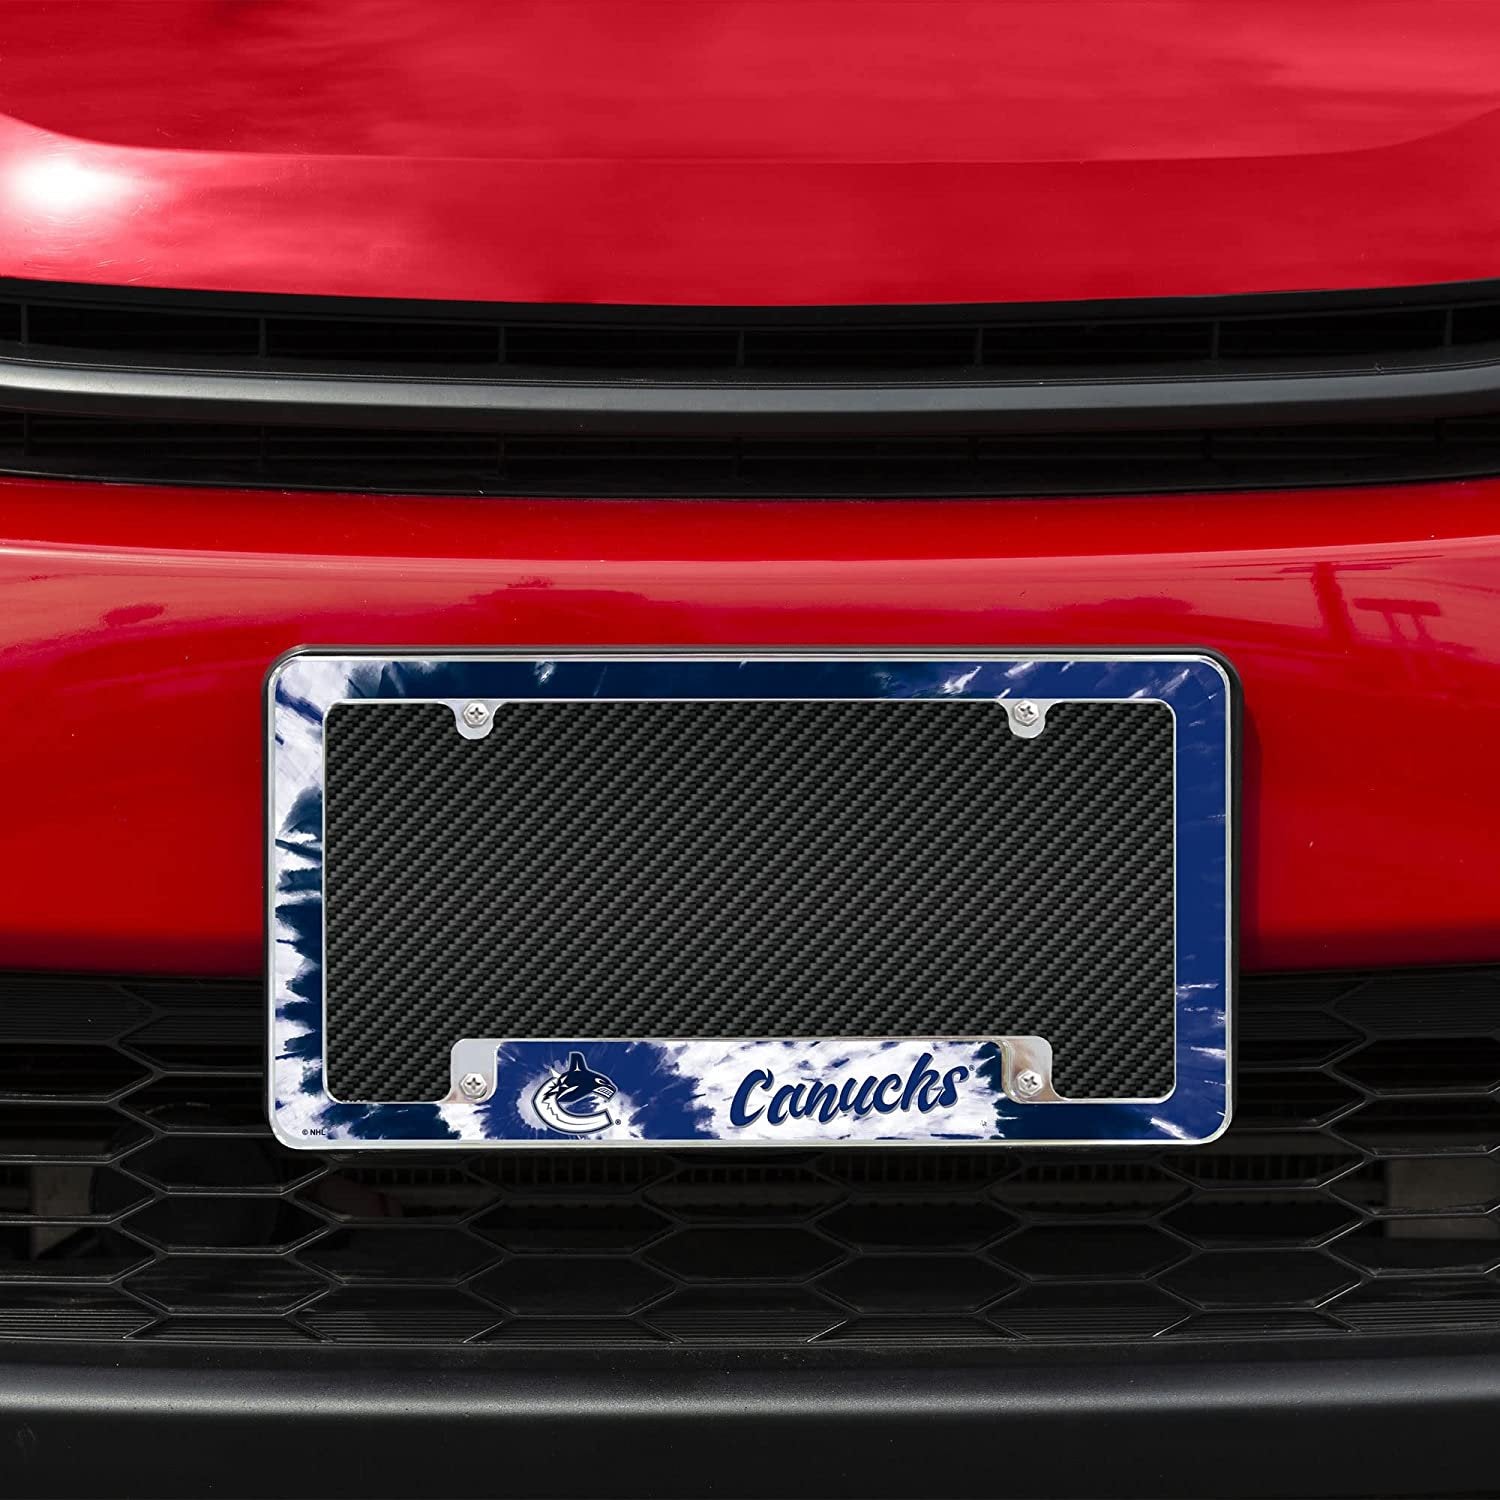 Vancouver Canucks Metal License Plate Frame Chrome Tag Cover Tie Dye Design 6x12 Inch